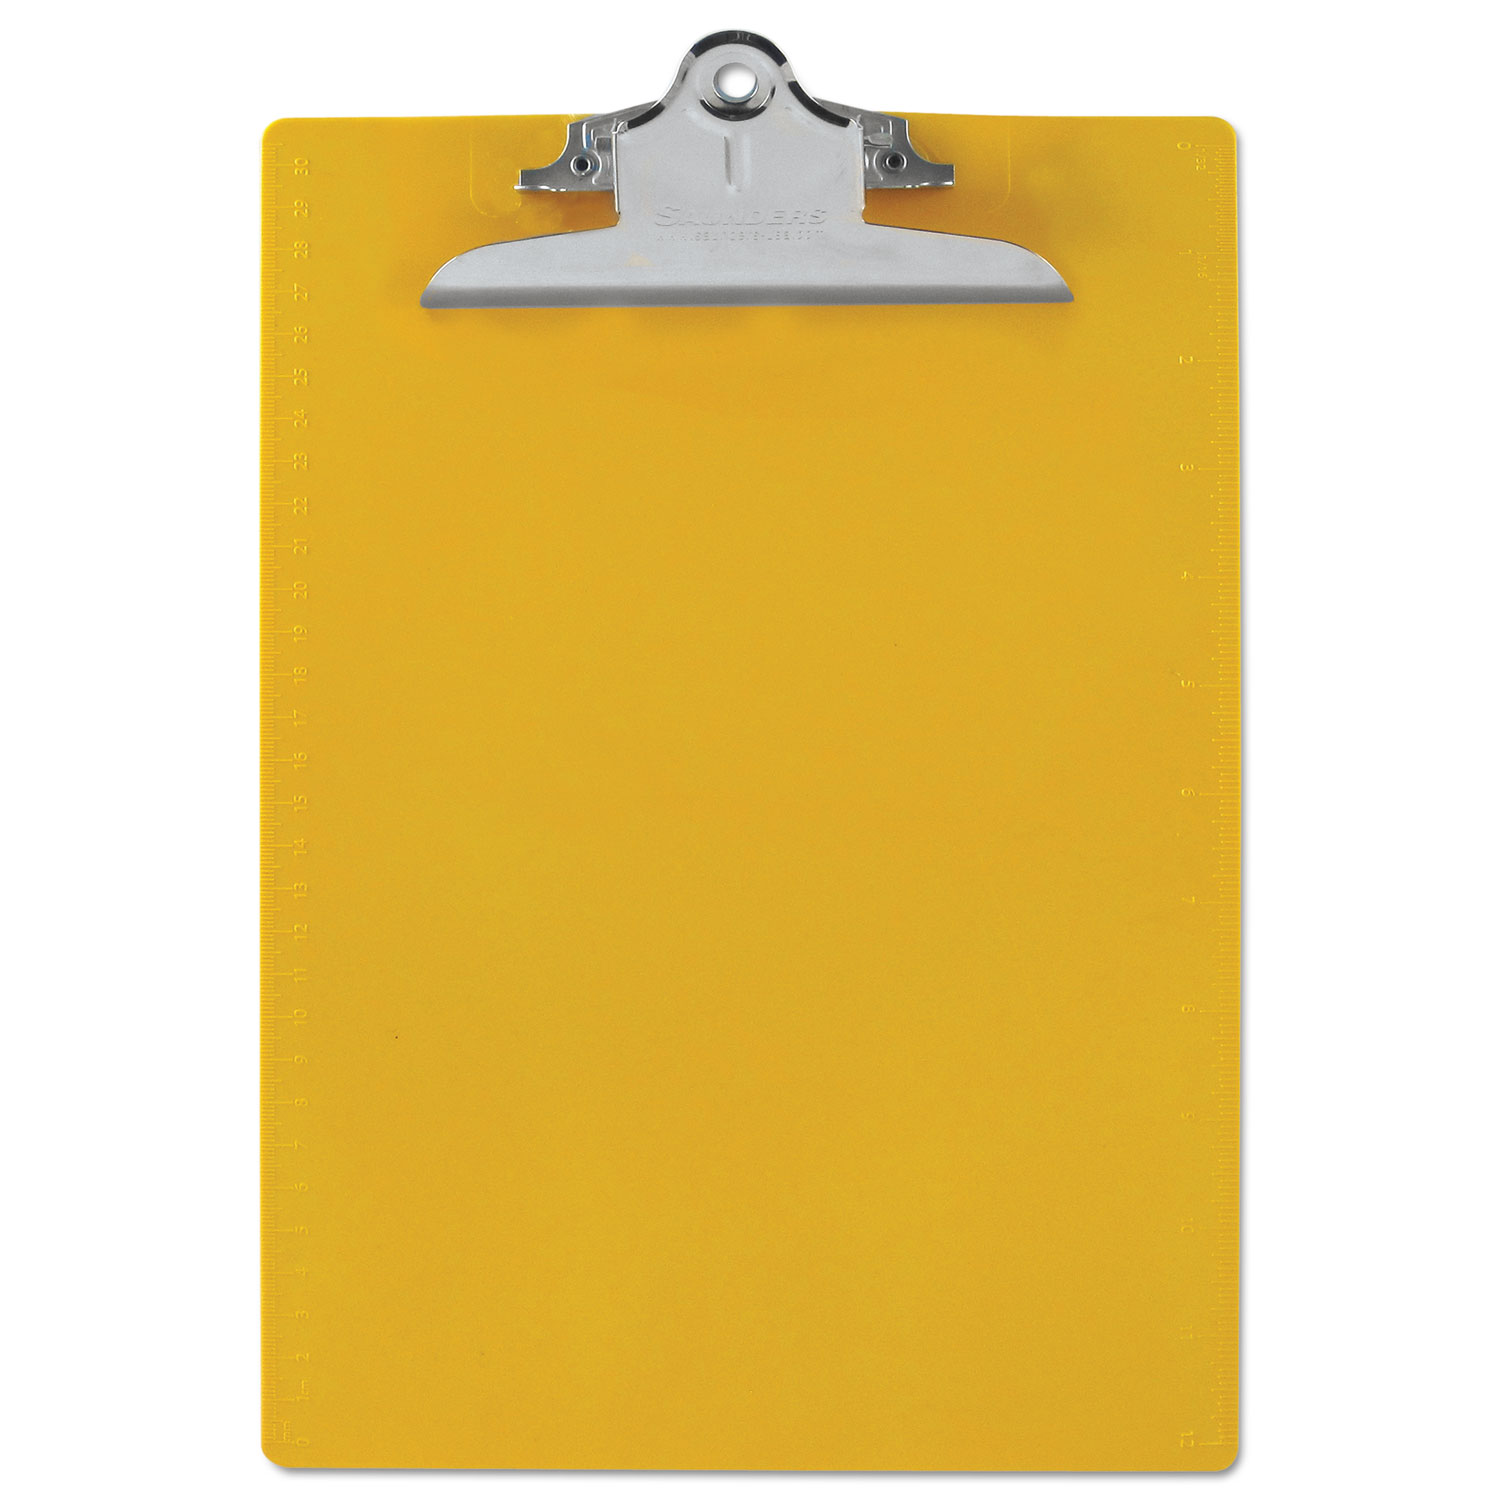  Saunders 21605 Recycled Plastic Clipboard w/Ruler Edge, 1 Clip Cap, 8 1/2 x 12 Sheets, Yellow (SAU21605) 